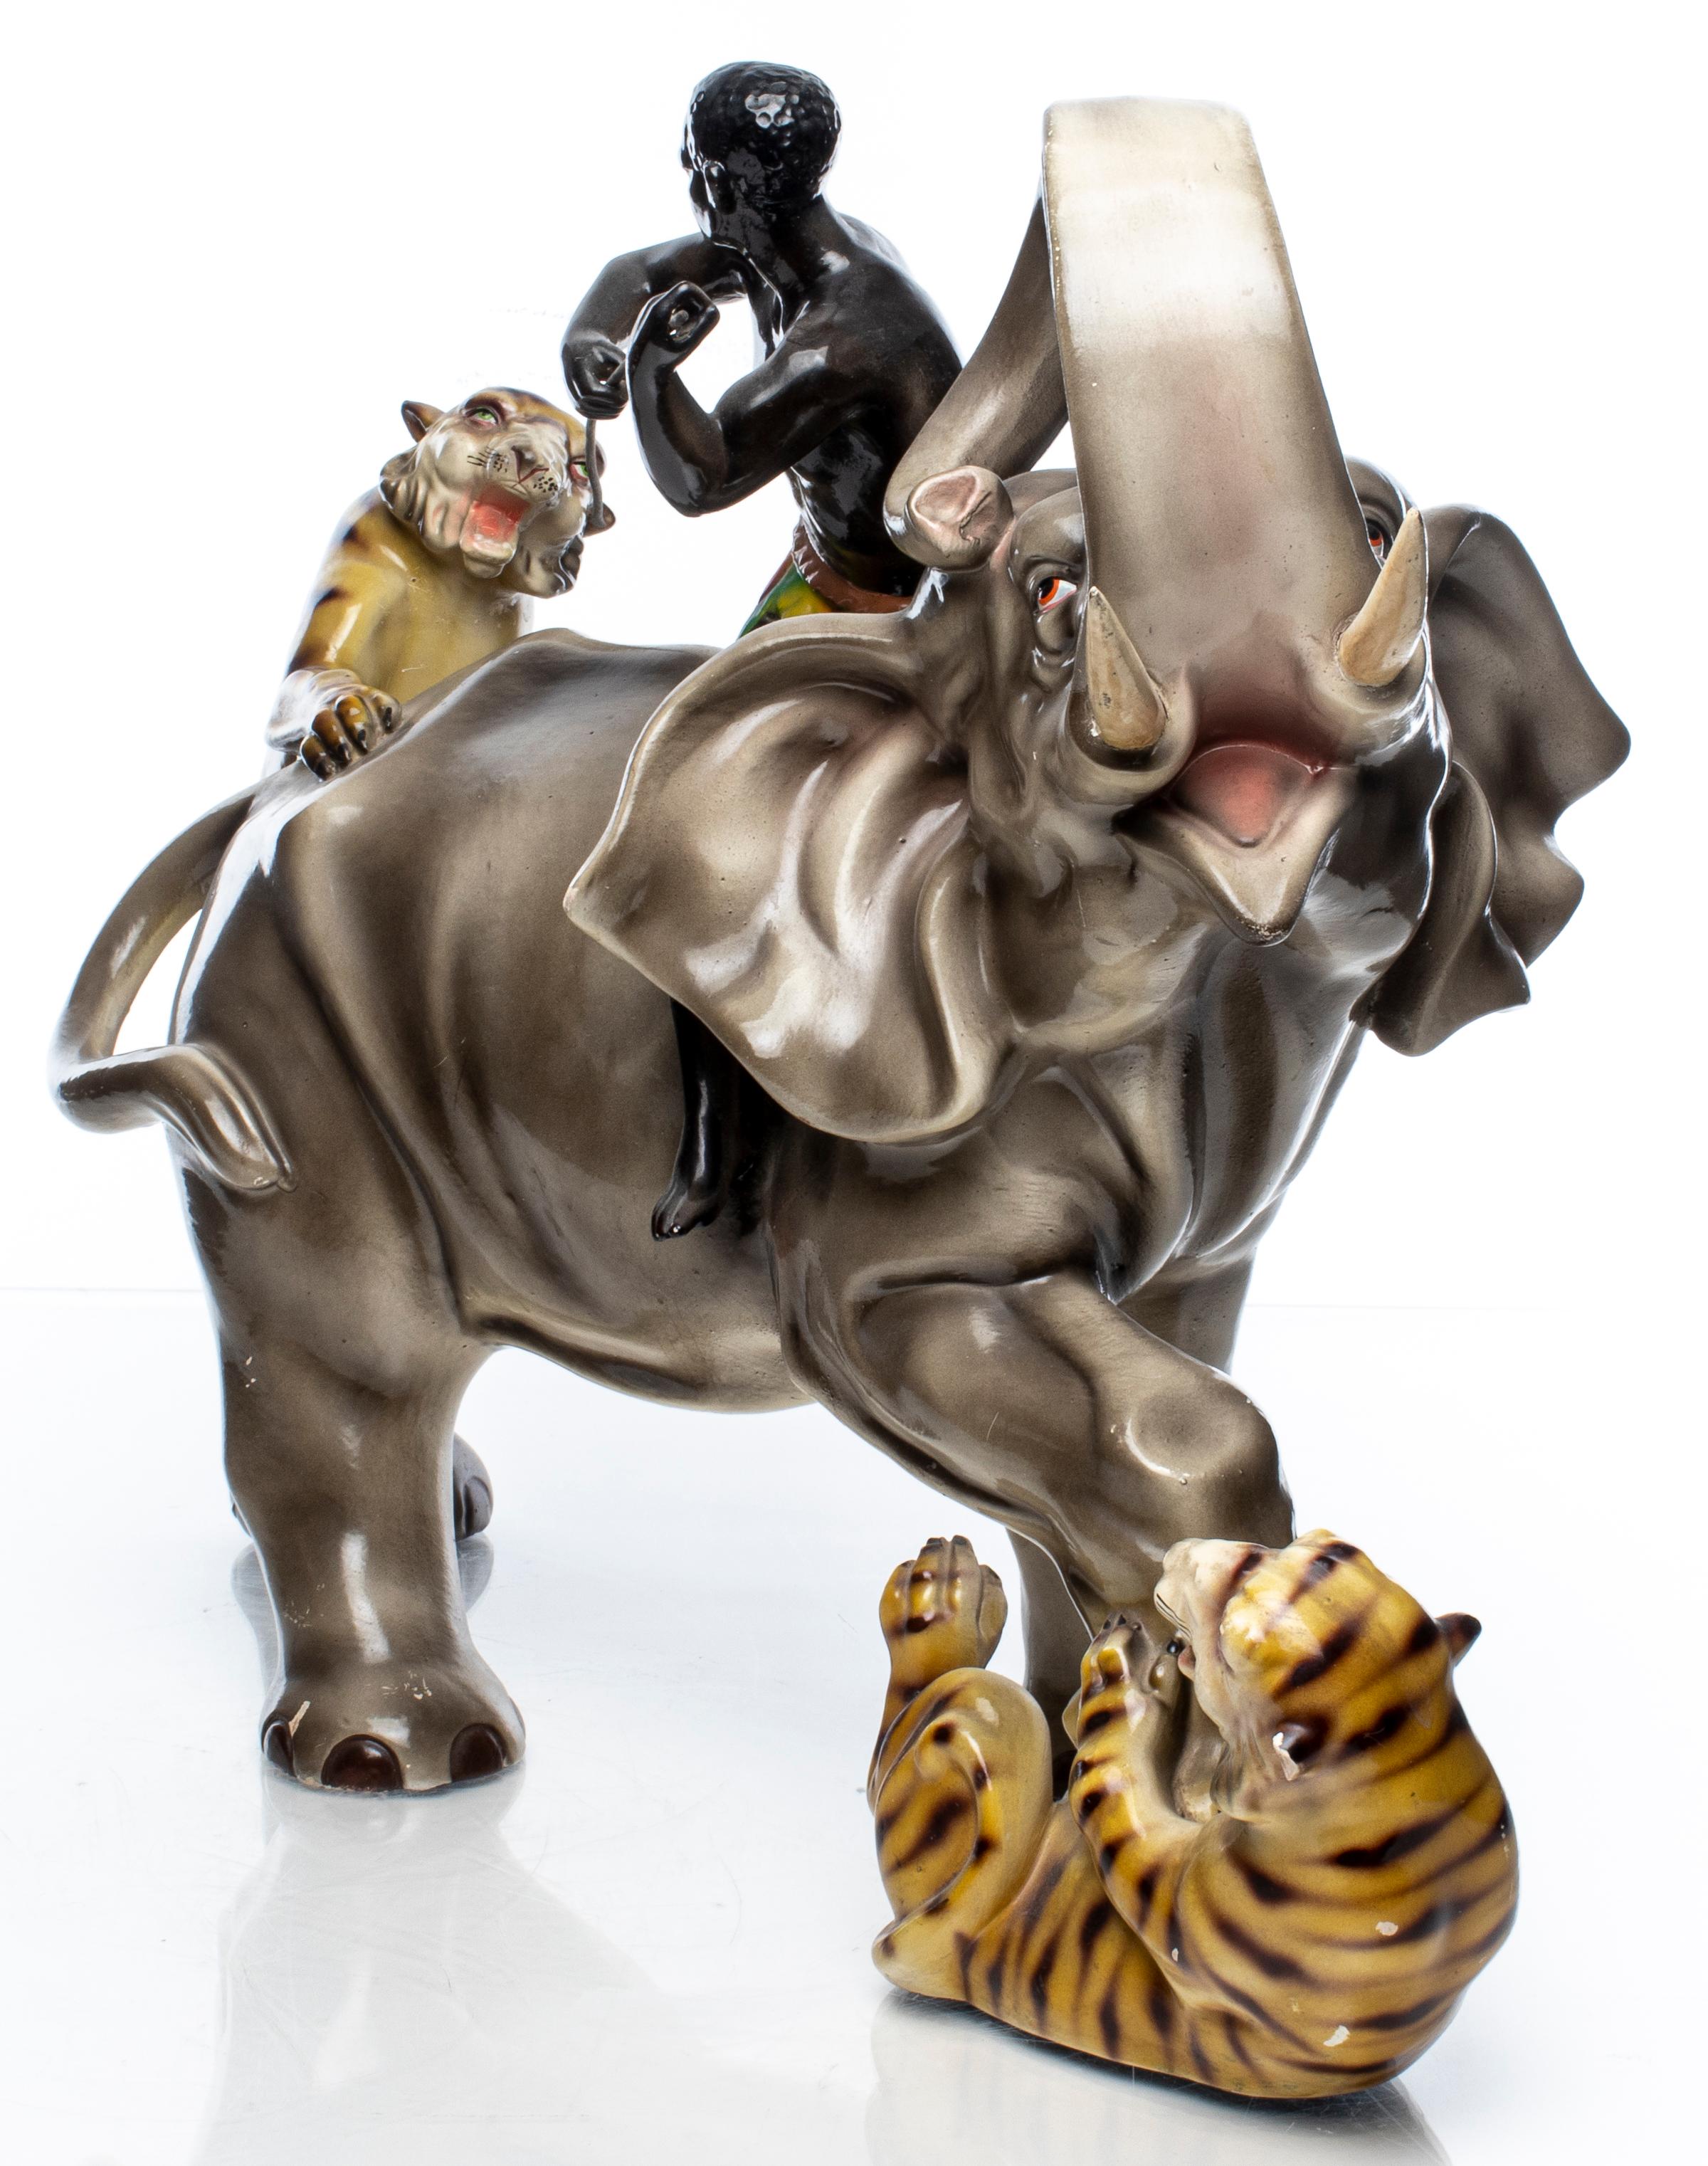 Large ceramic model of an elephant and man attacked by tigers, unsigned. Measures: 16” H x 22.5” W x 11.5” D.